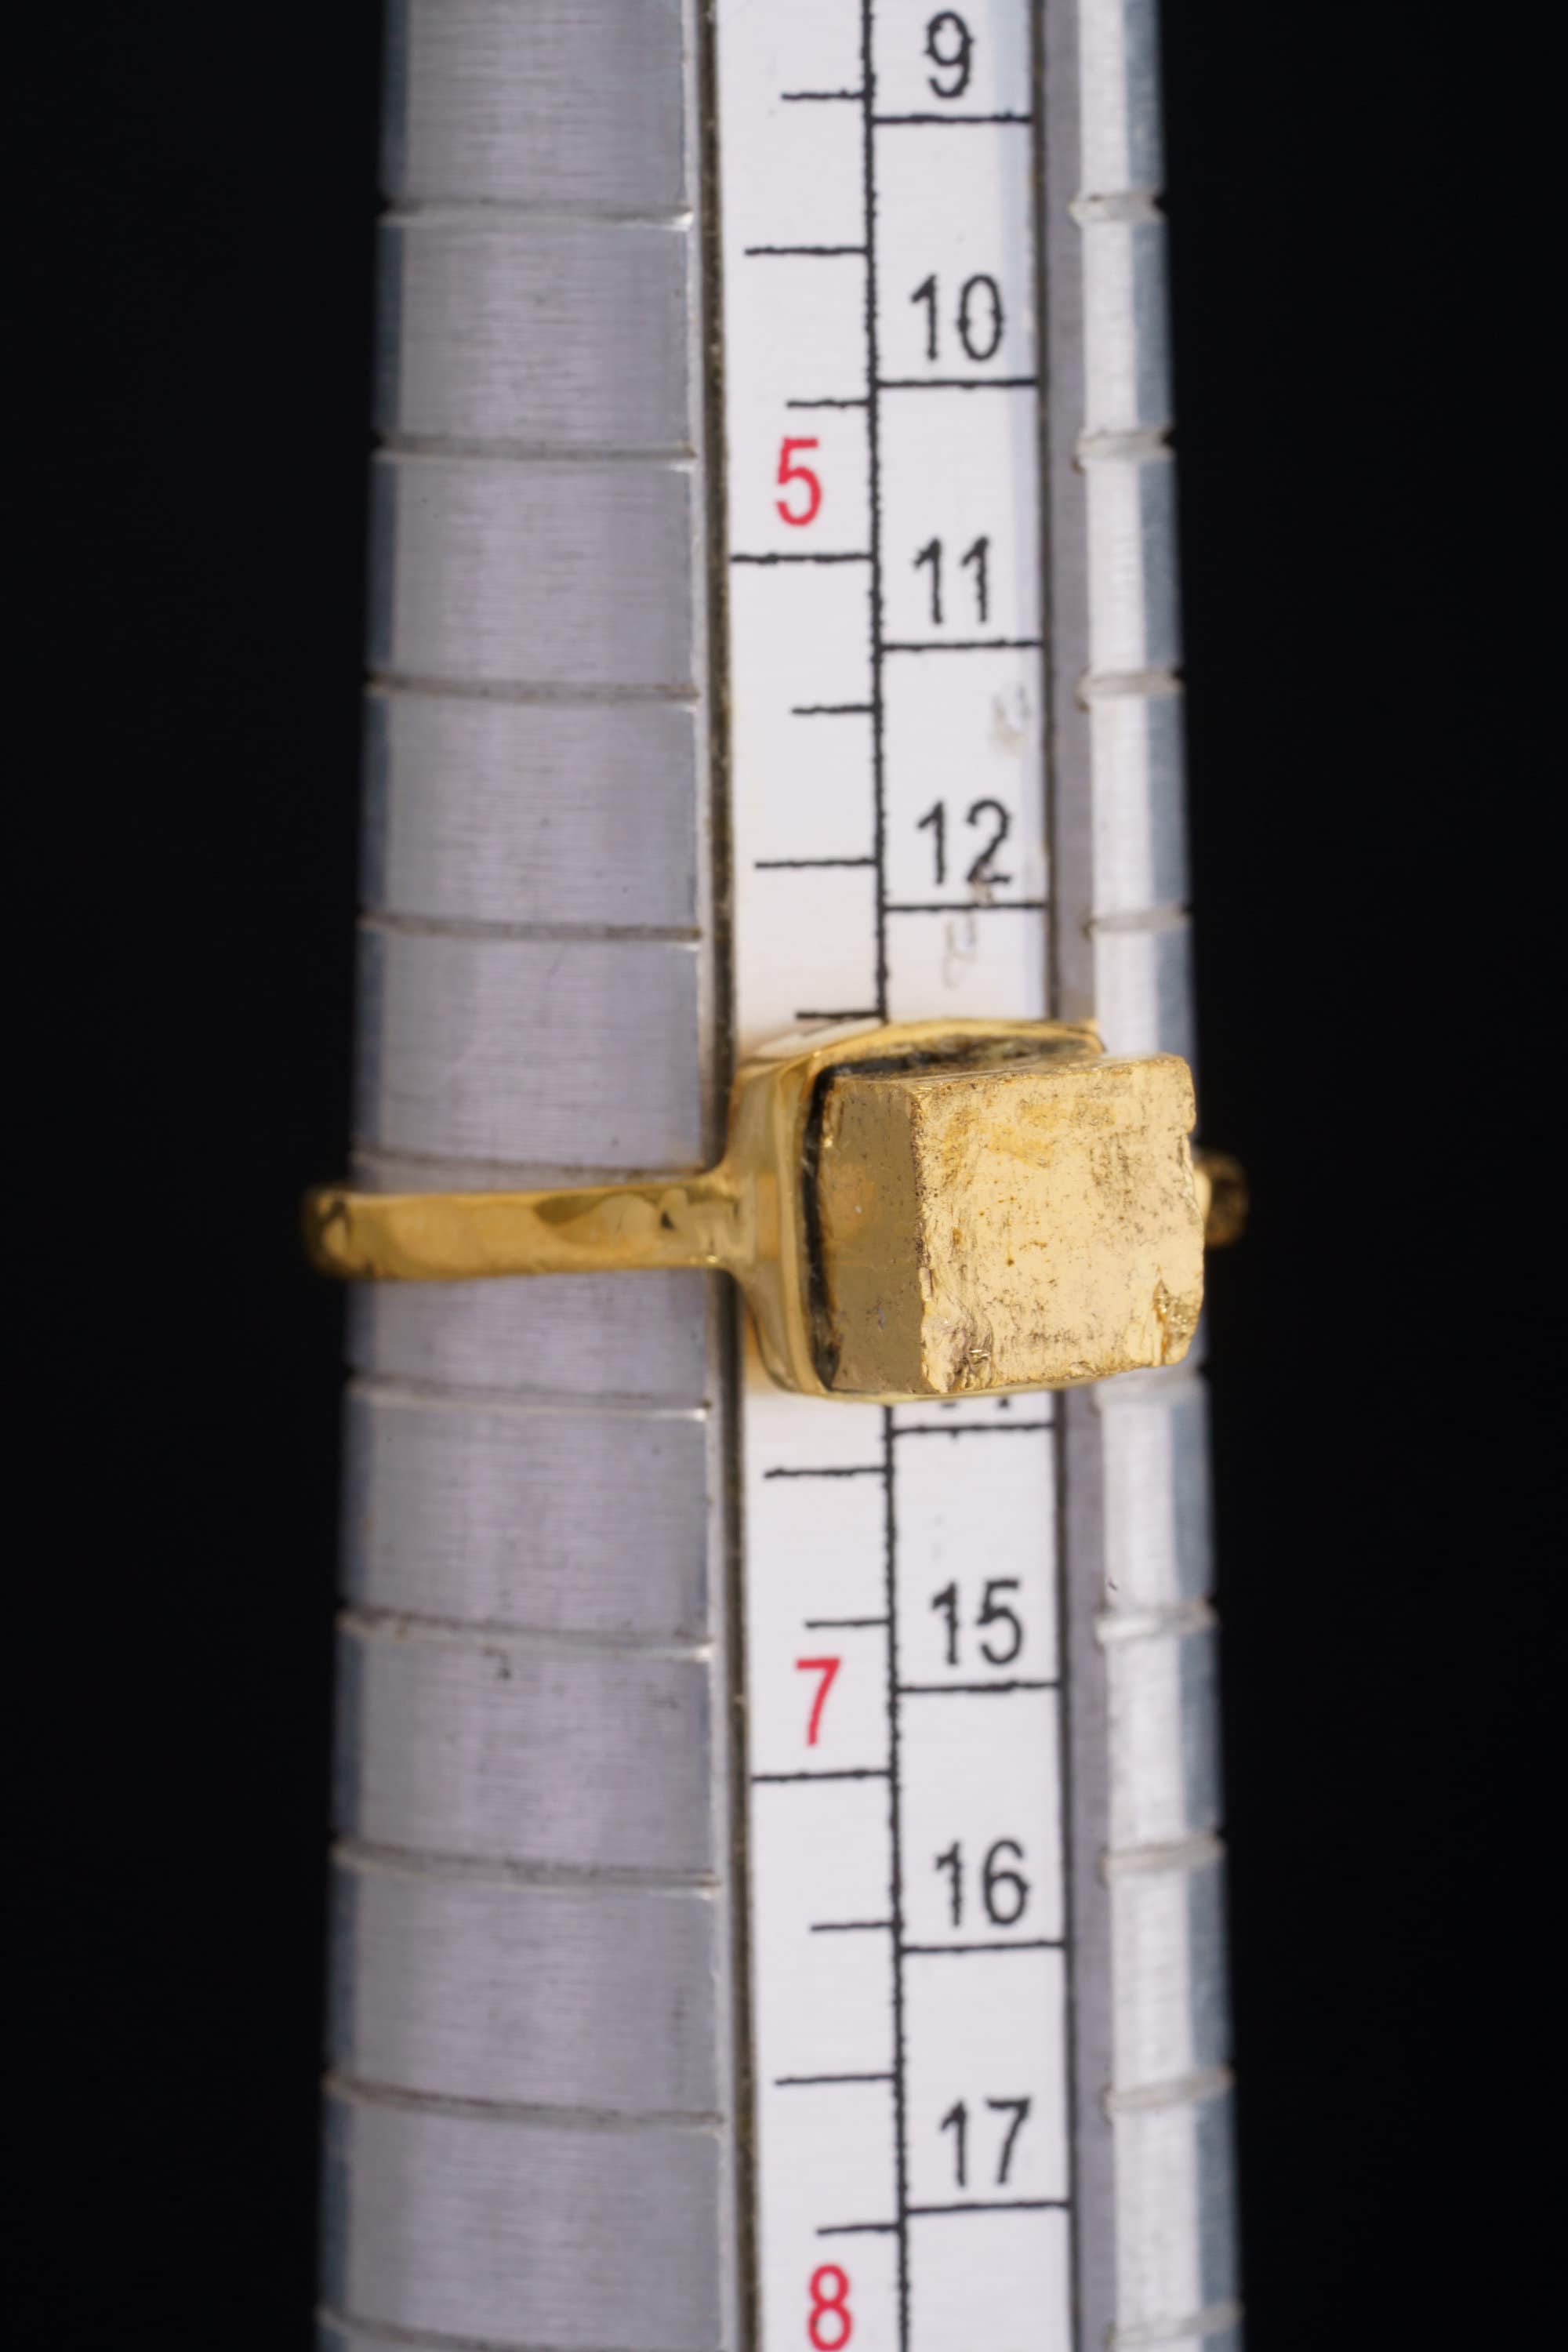 Gold Coated Australian Cubic Pyrite - Stack Crystal Ring - Size 6 1/4 US - Gold Plated 925 Sterling Silver - Thin Band Hammer Textured